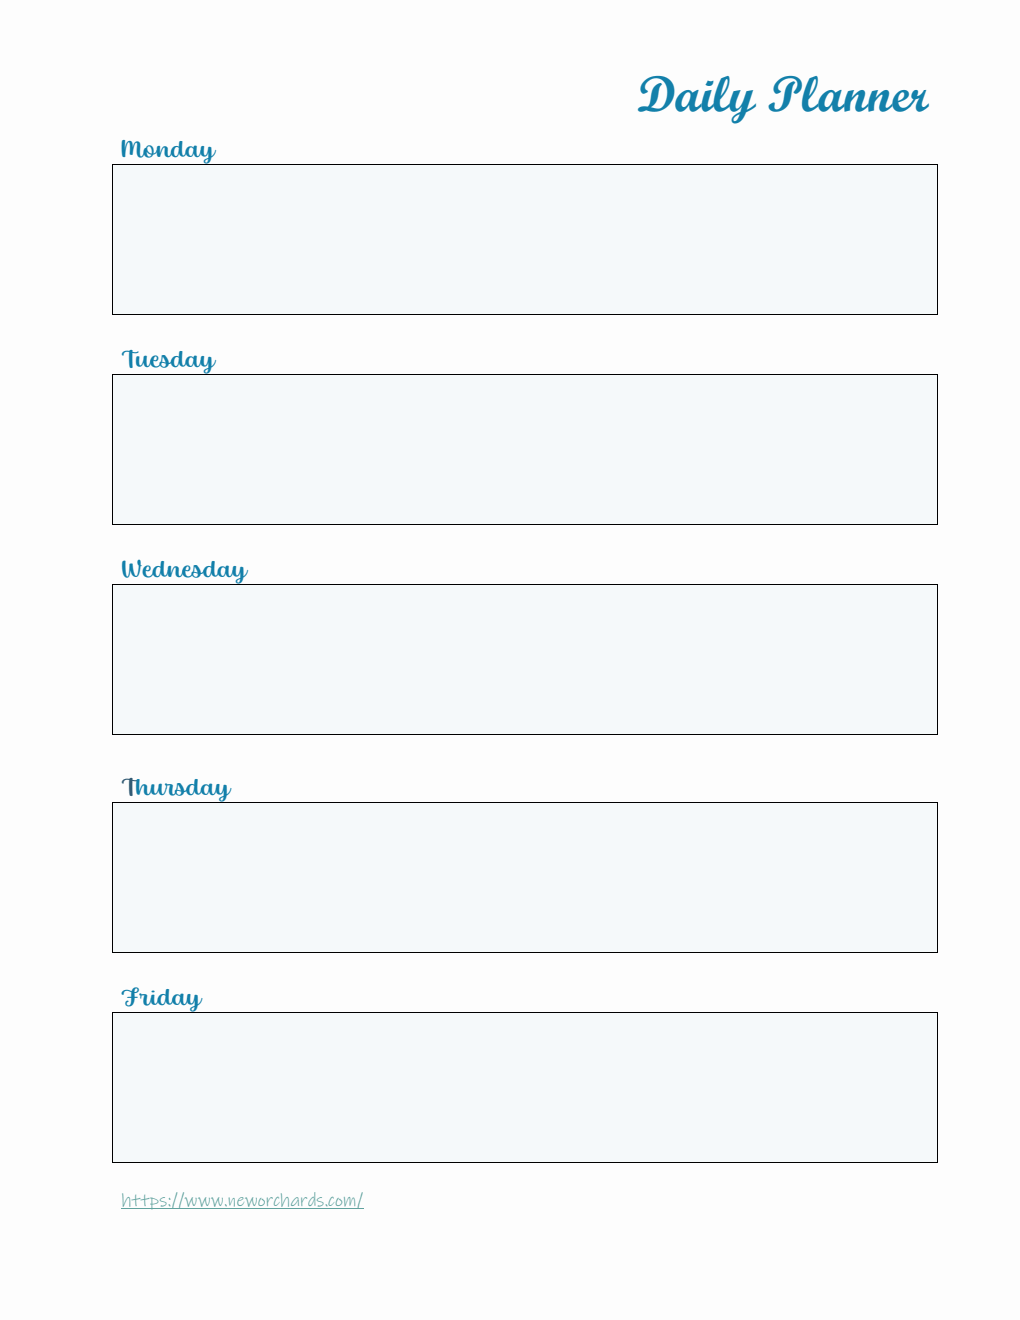 Daily Planner Template Downloadable in PDF